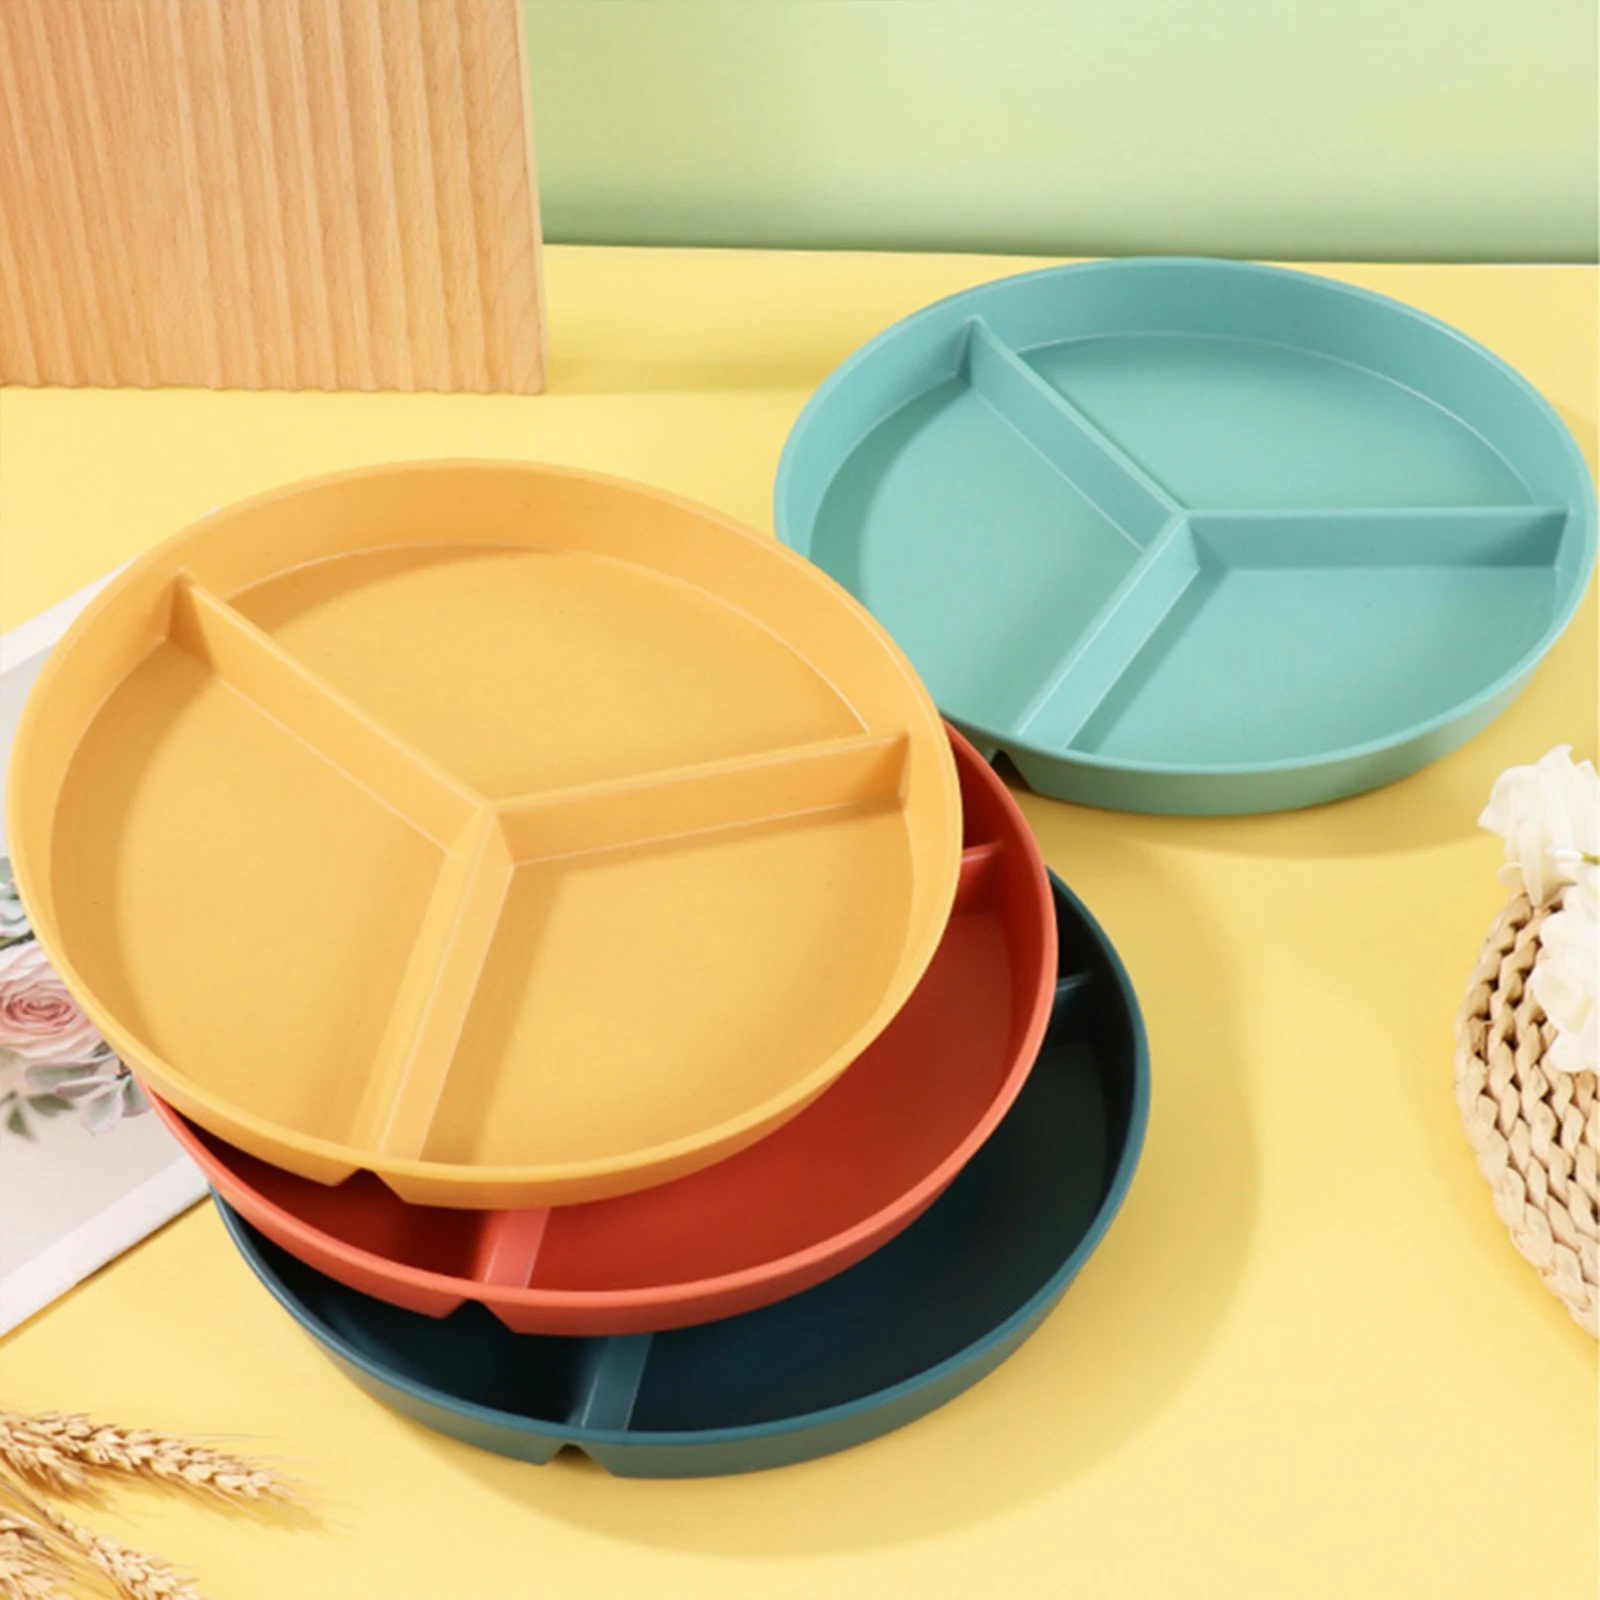 

Three-Grid Western Compartment Plate For Food Fruit Salad Divided Plate Wheat Straw Diet Meal Plate Food Tray Kitchen Dinnerware